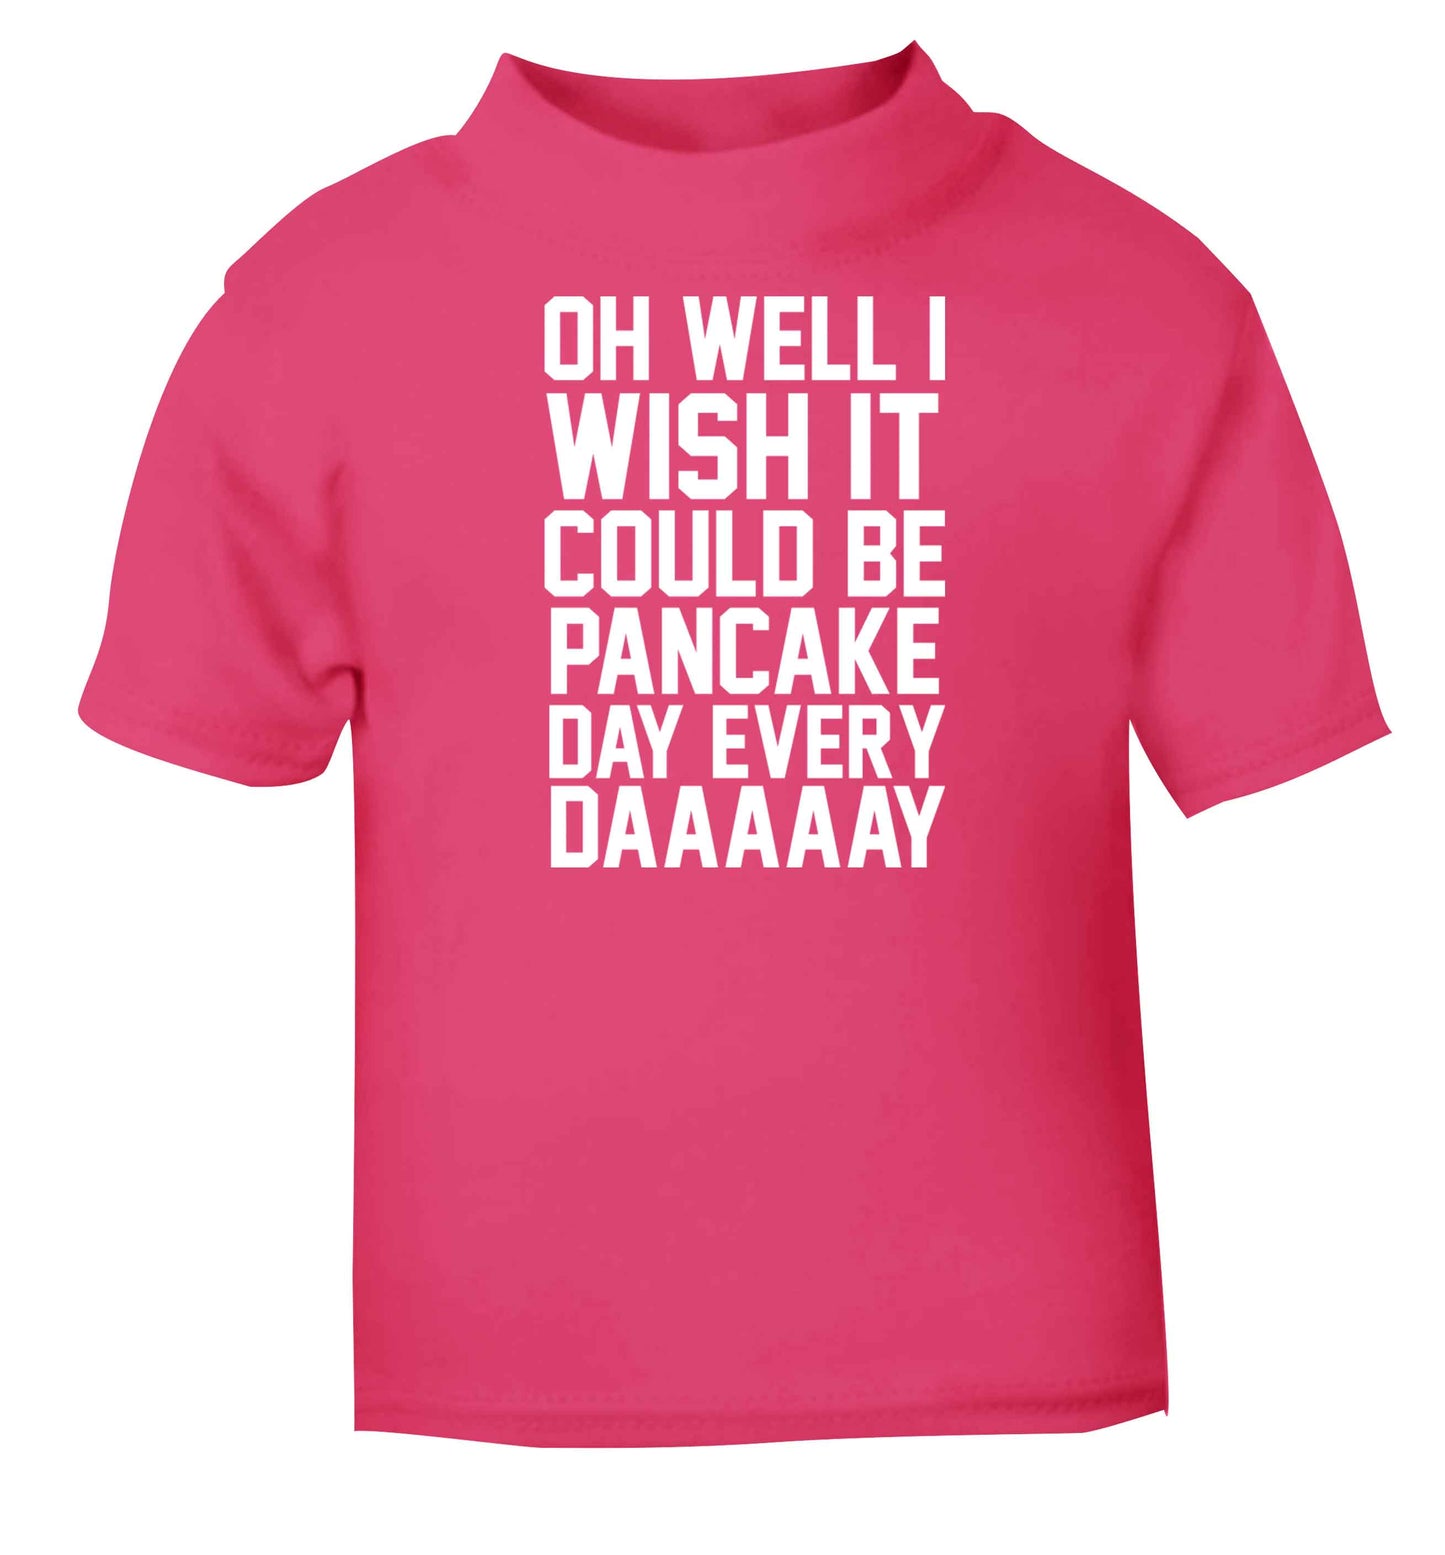 Oh well I wish it could be pancake day every day pink baby toddler Tshirt 2 Years